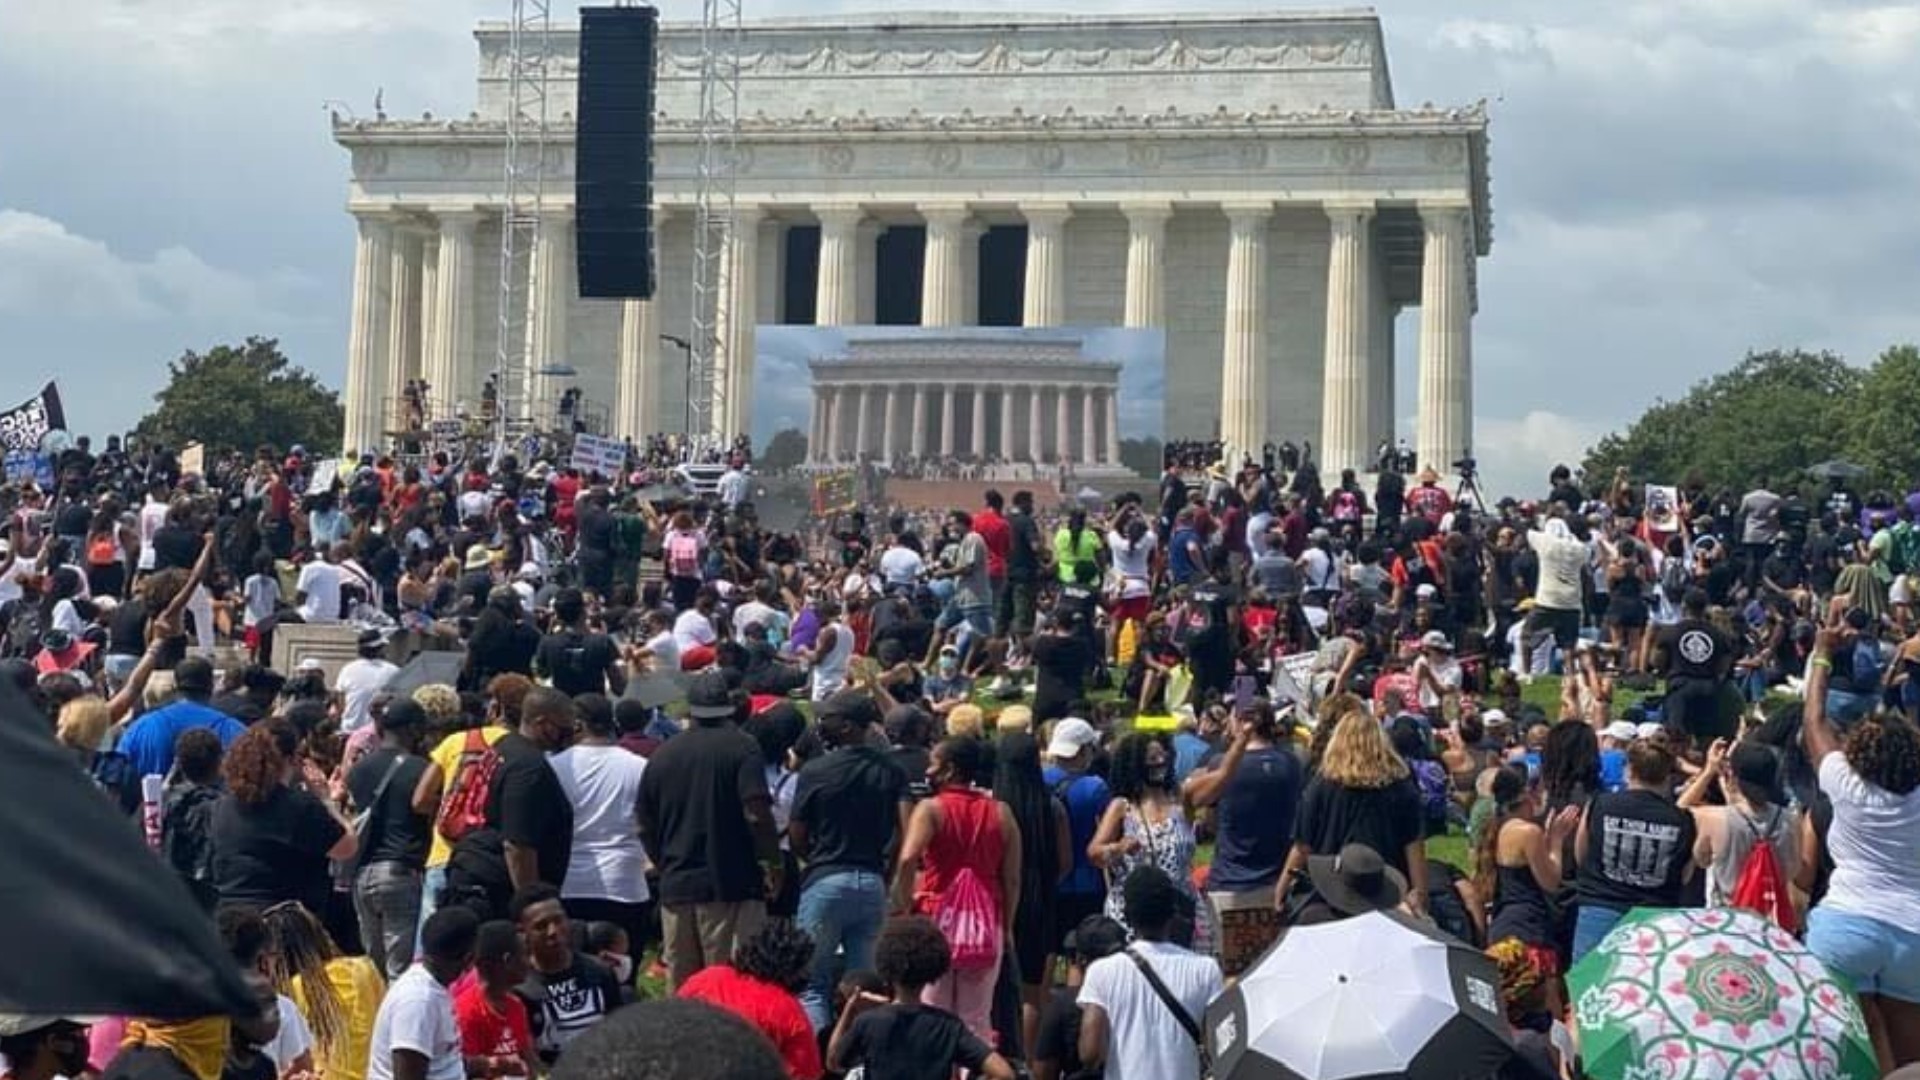 Here are the best moments from the National Action Network's Commitment March "Get Off Our Necks," also known as the 2020 March on Washington.